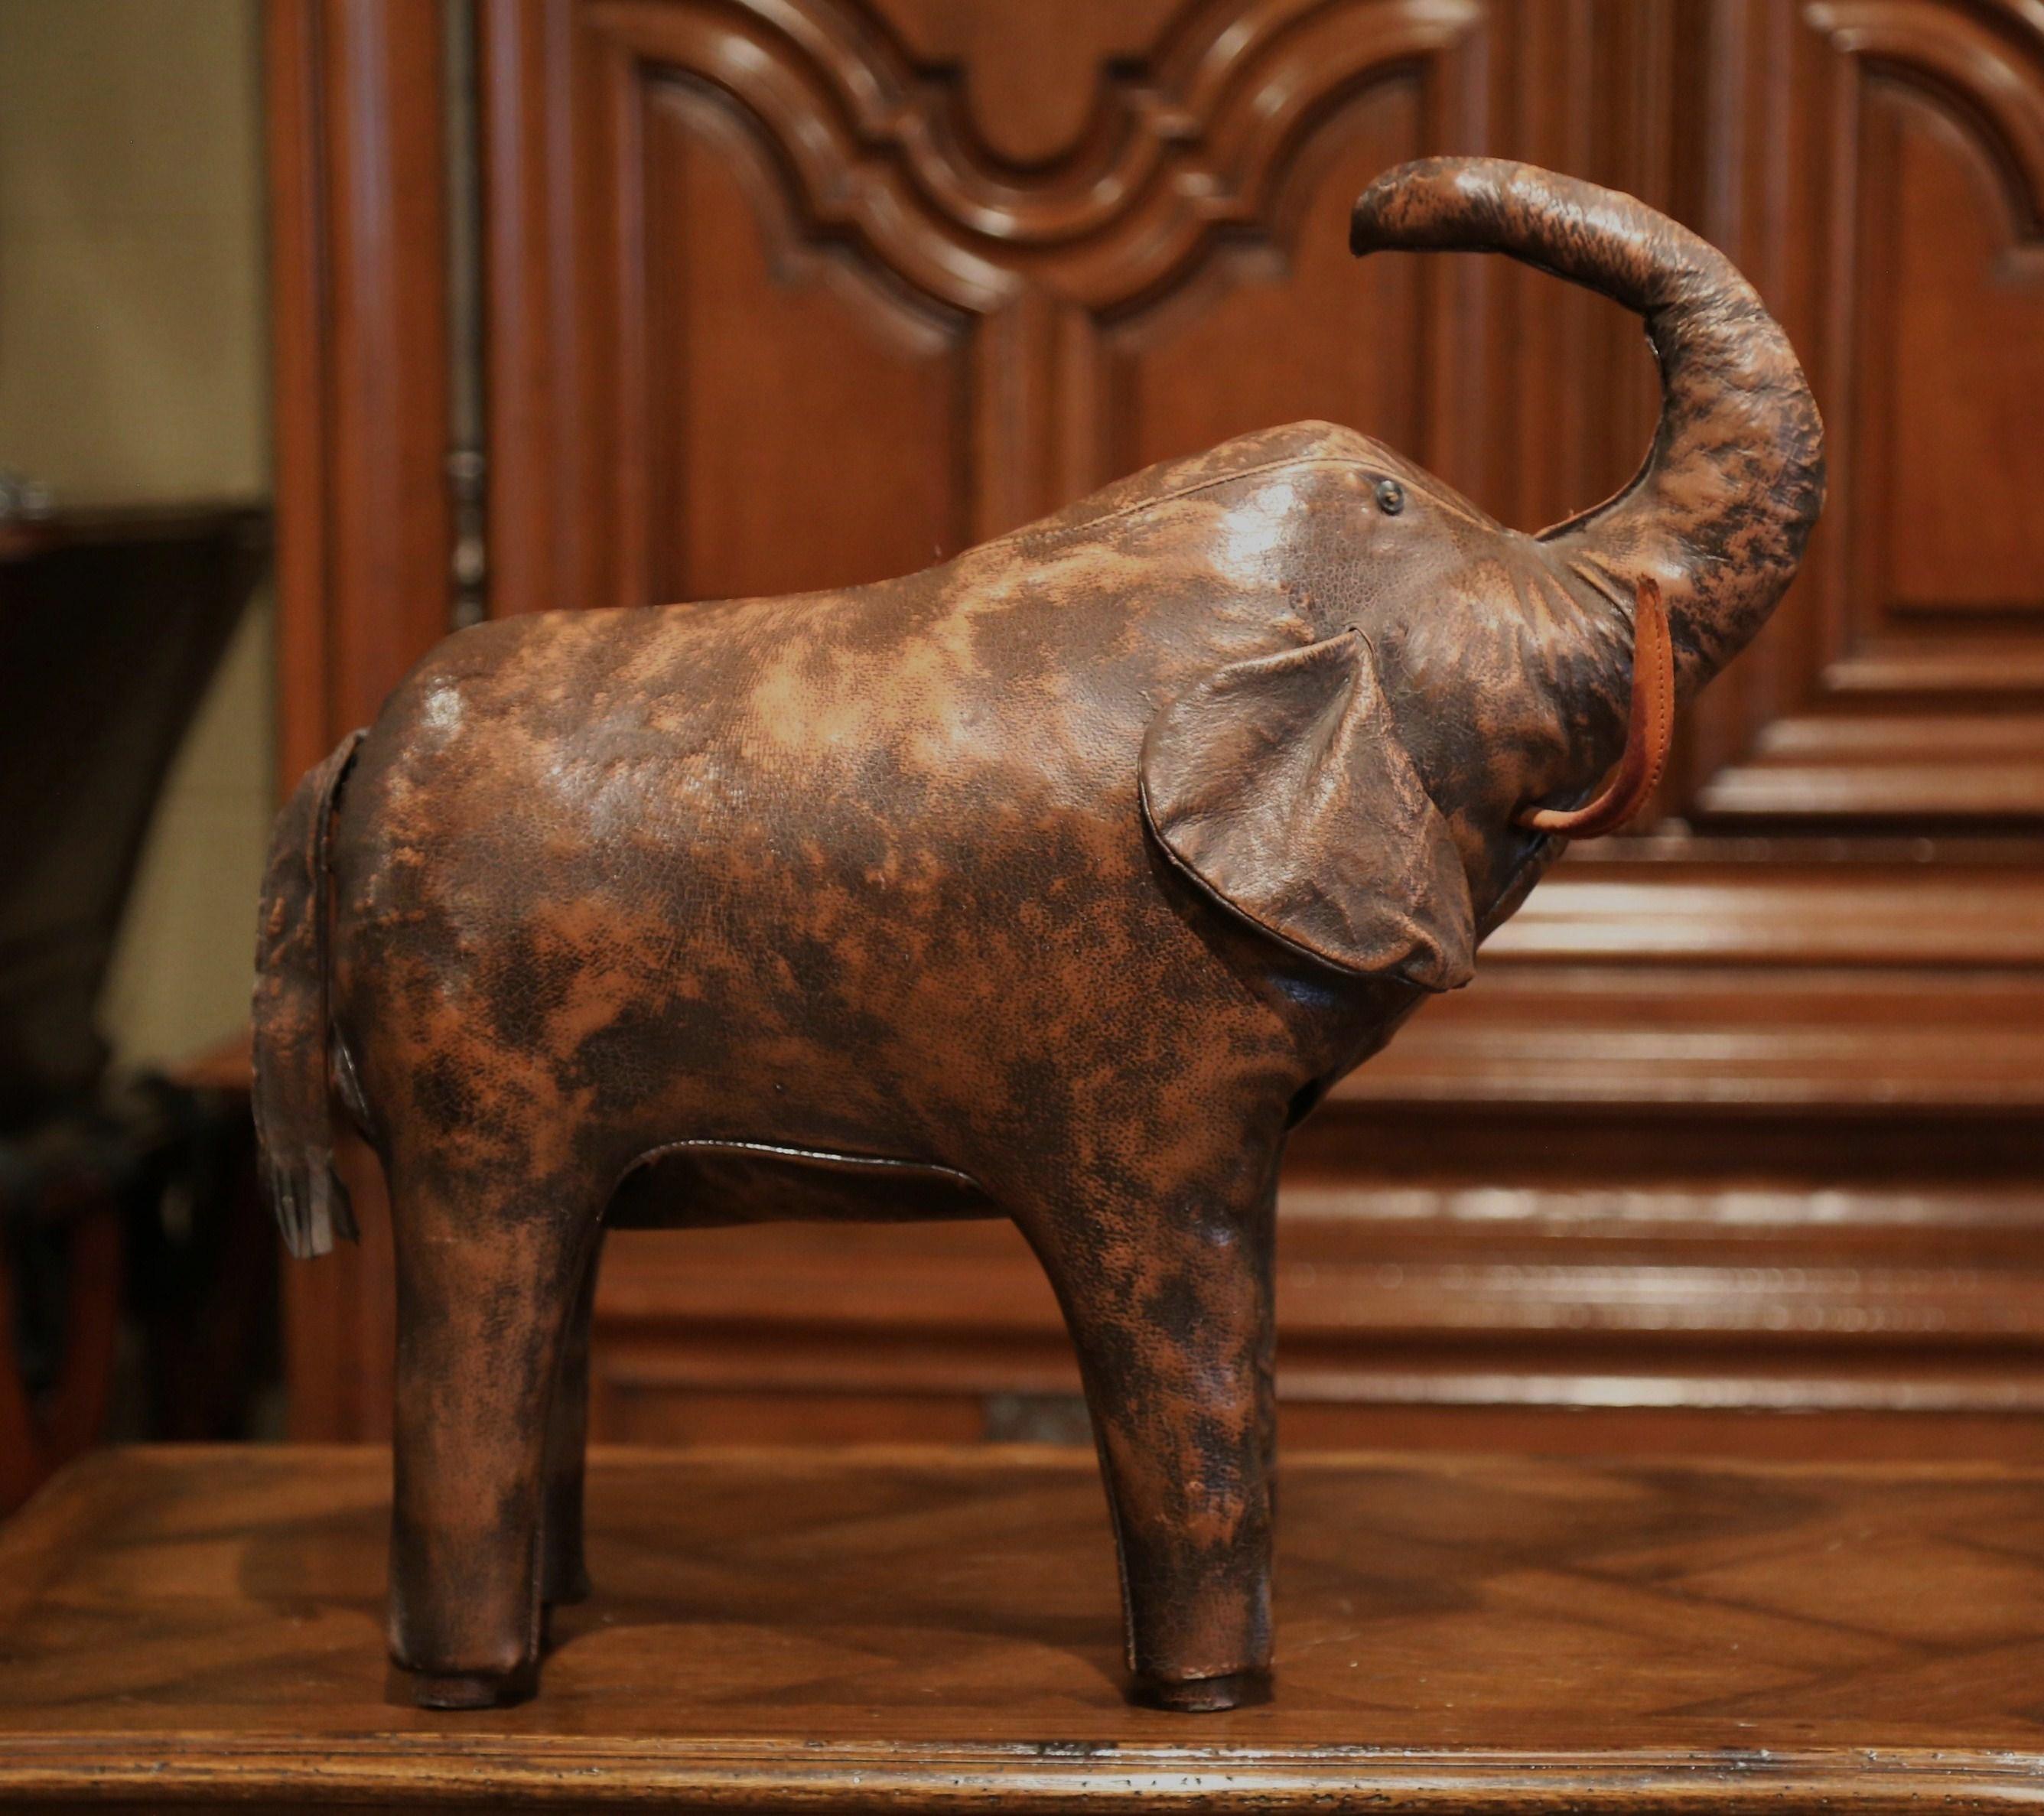 Rest your feet on this elegant stool! Crafted in Spain, circa 2000, and shaped as an elephant, the unique, freestanding, sculptural stool is upholstered with its original brown leather. The vintage pachyderm sculpture is in excellent condition and